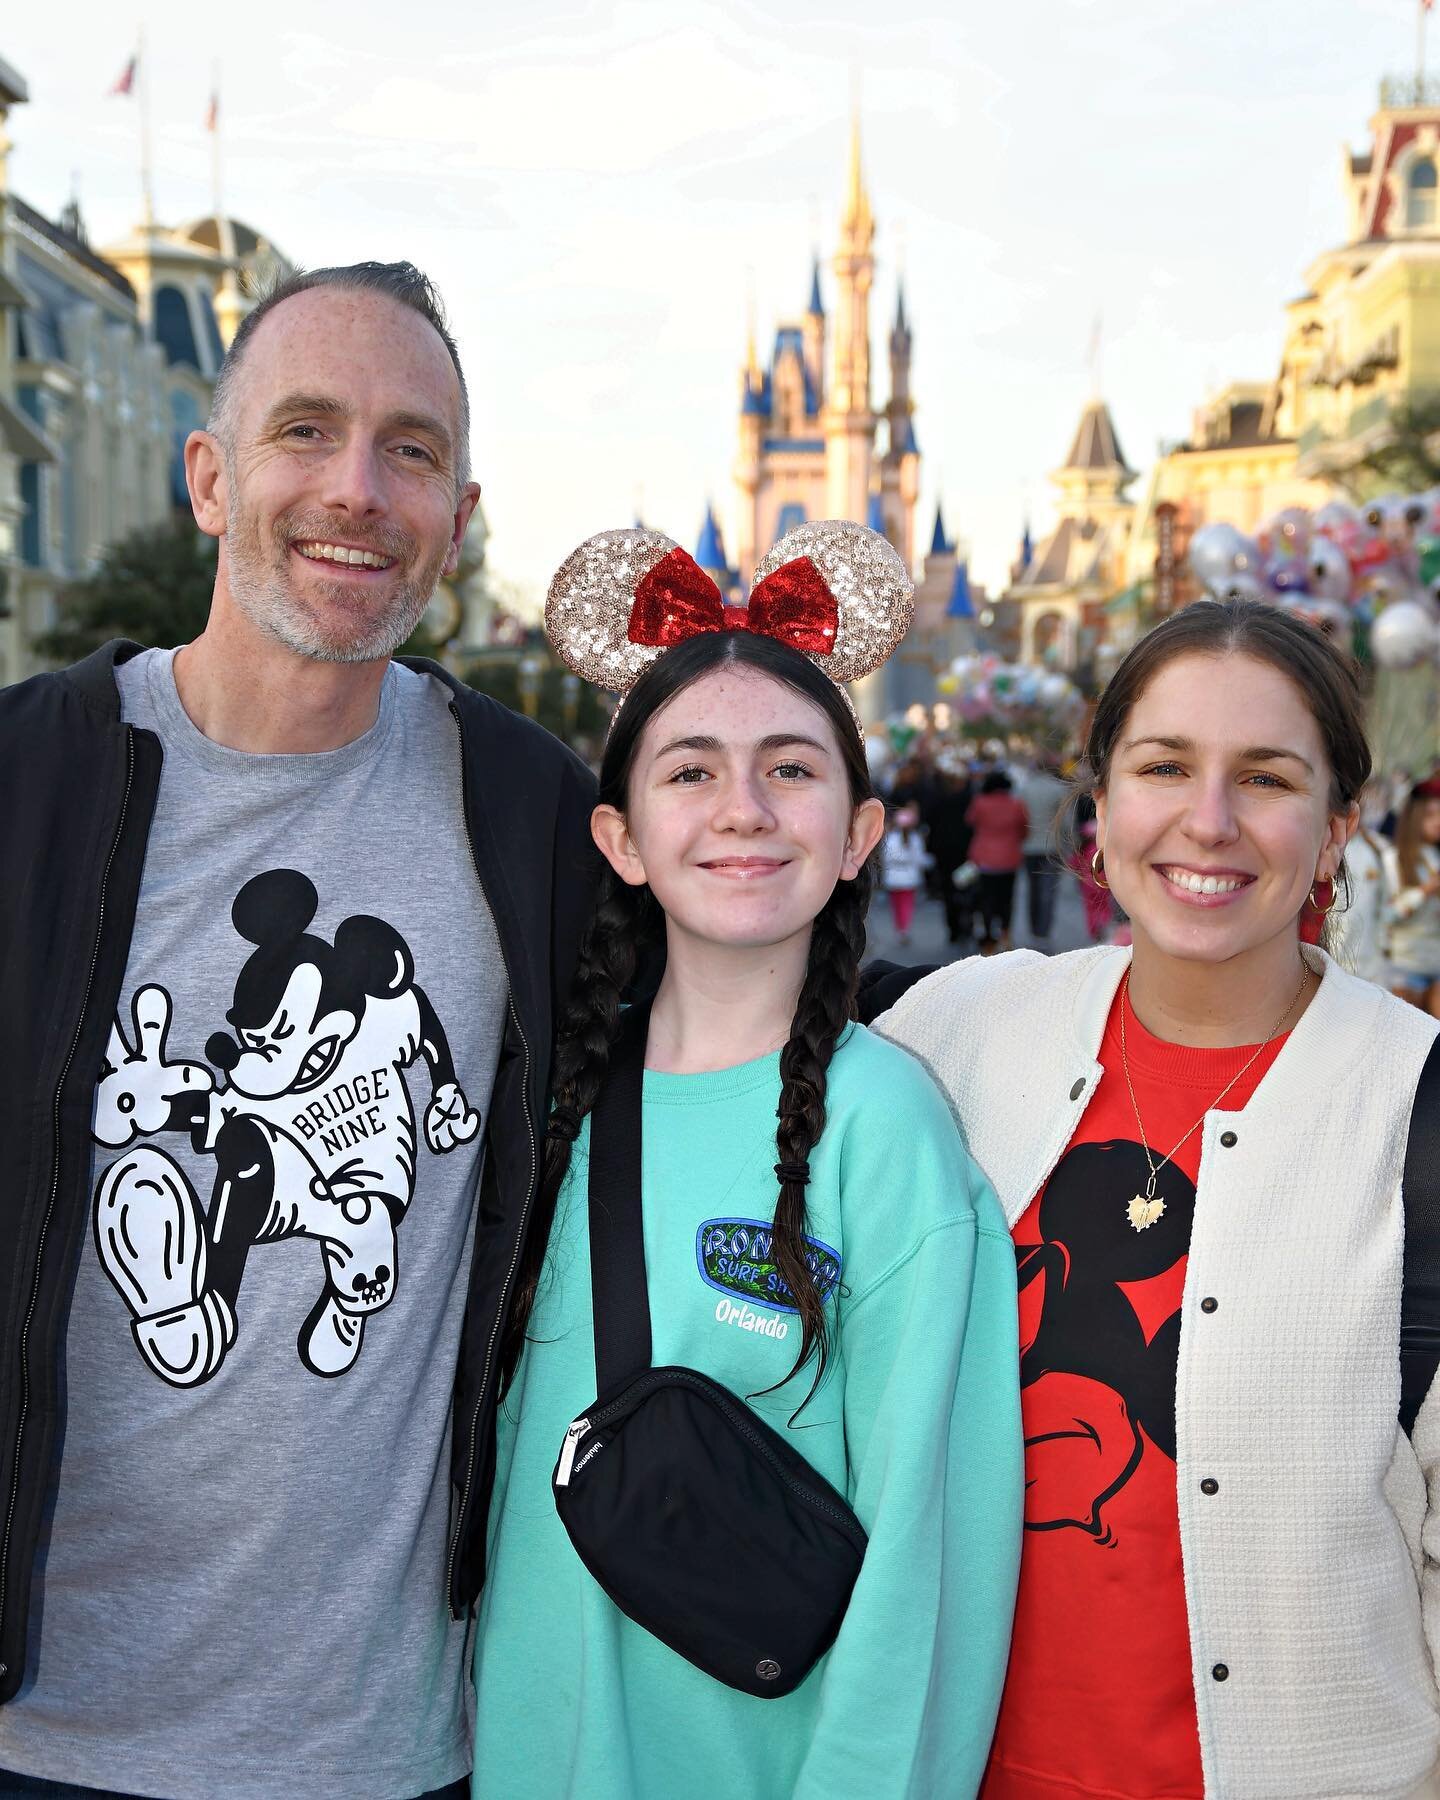 @katbatten, @georgiamadethis and I had an absolutely unreal trip with family while visiting Orlando Florida last week. My first visit since I was younger than my daughter and watching her let her guard down and just be a kid was the best part. Hit Un